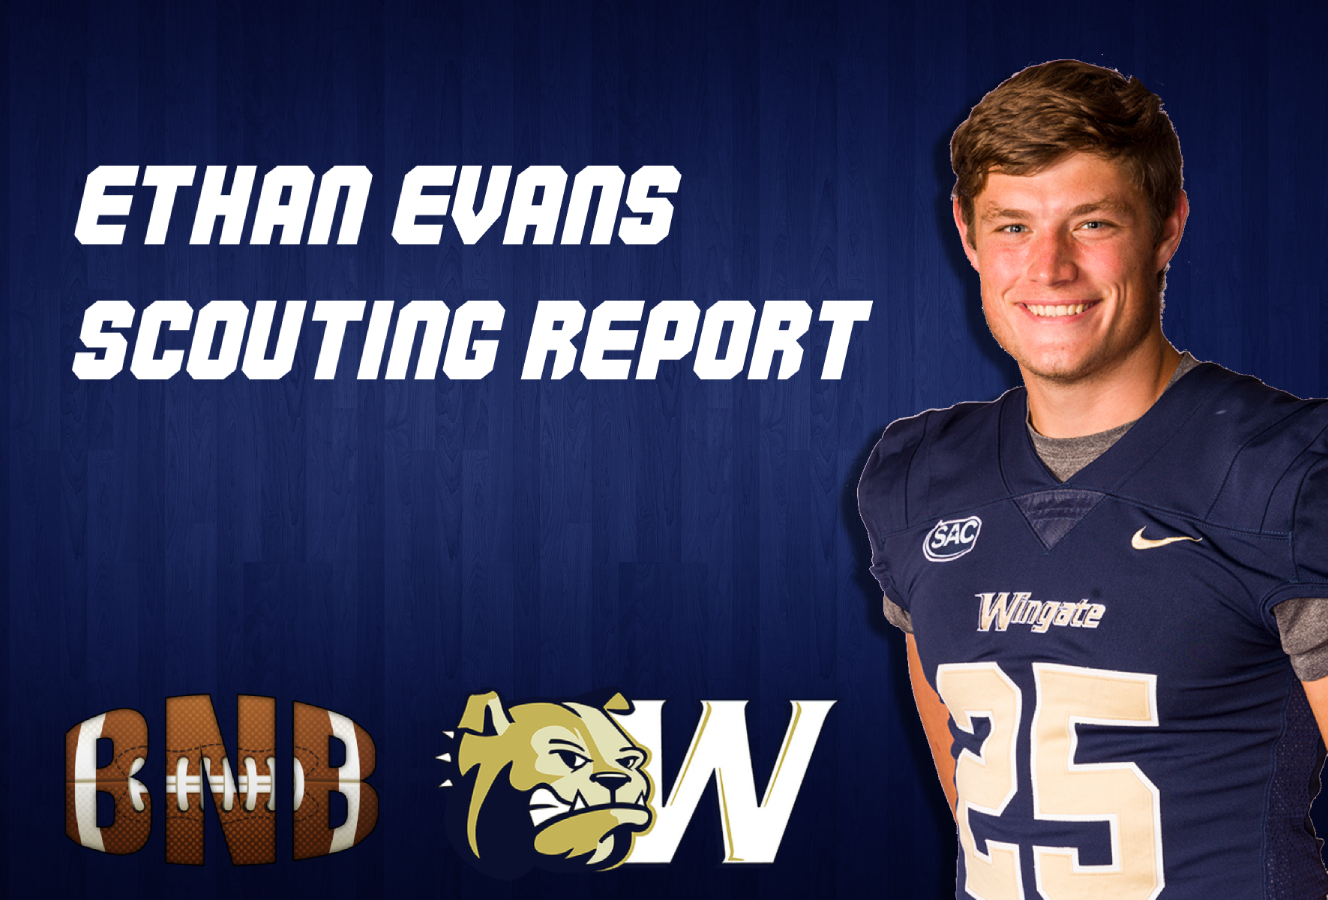 Ethan Evans Scouting Report: D2’s Top Draft Prospect?